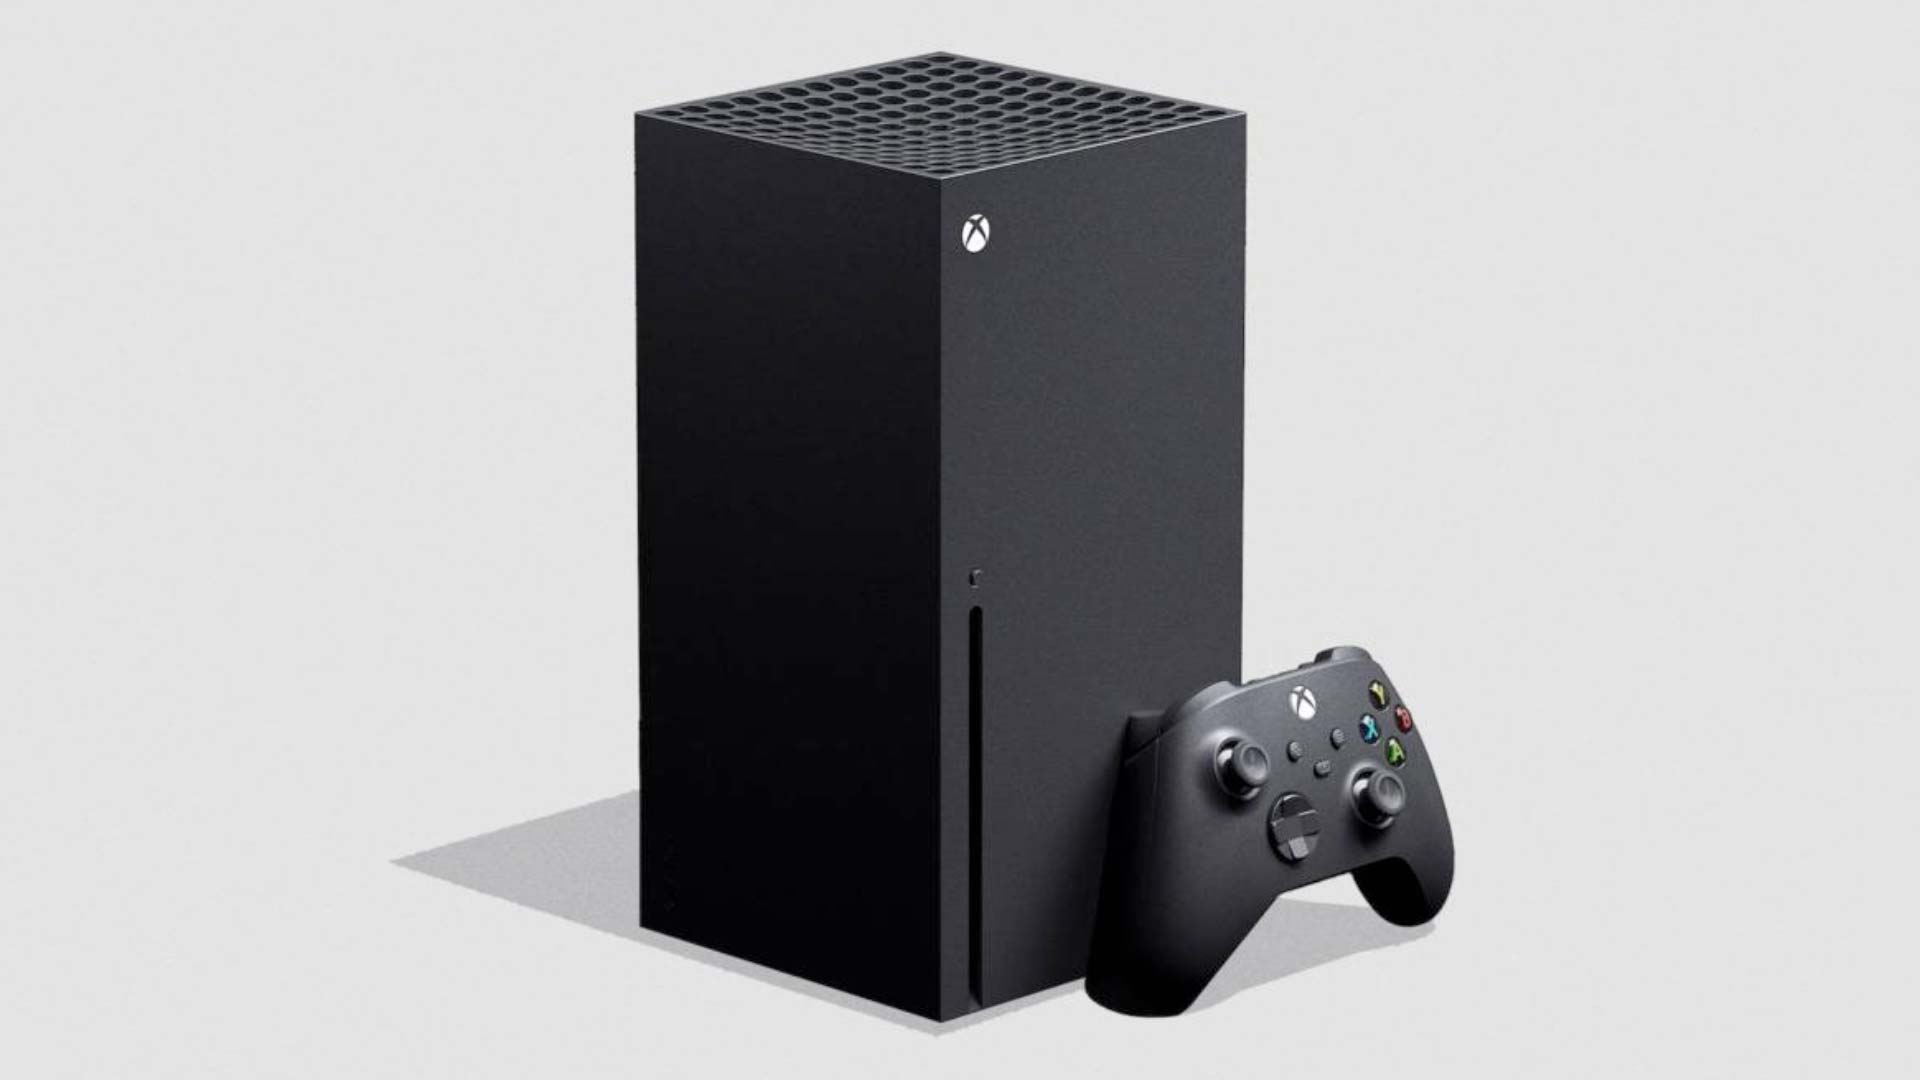 Why Are Xbox Series X So Expensive?